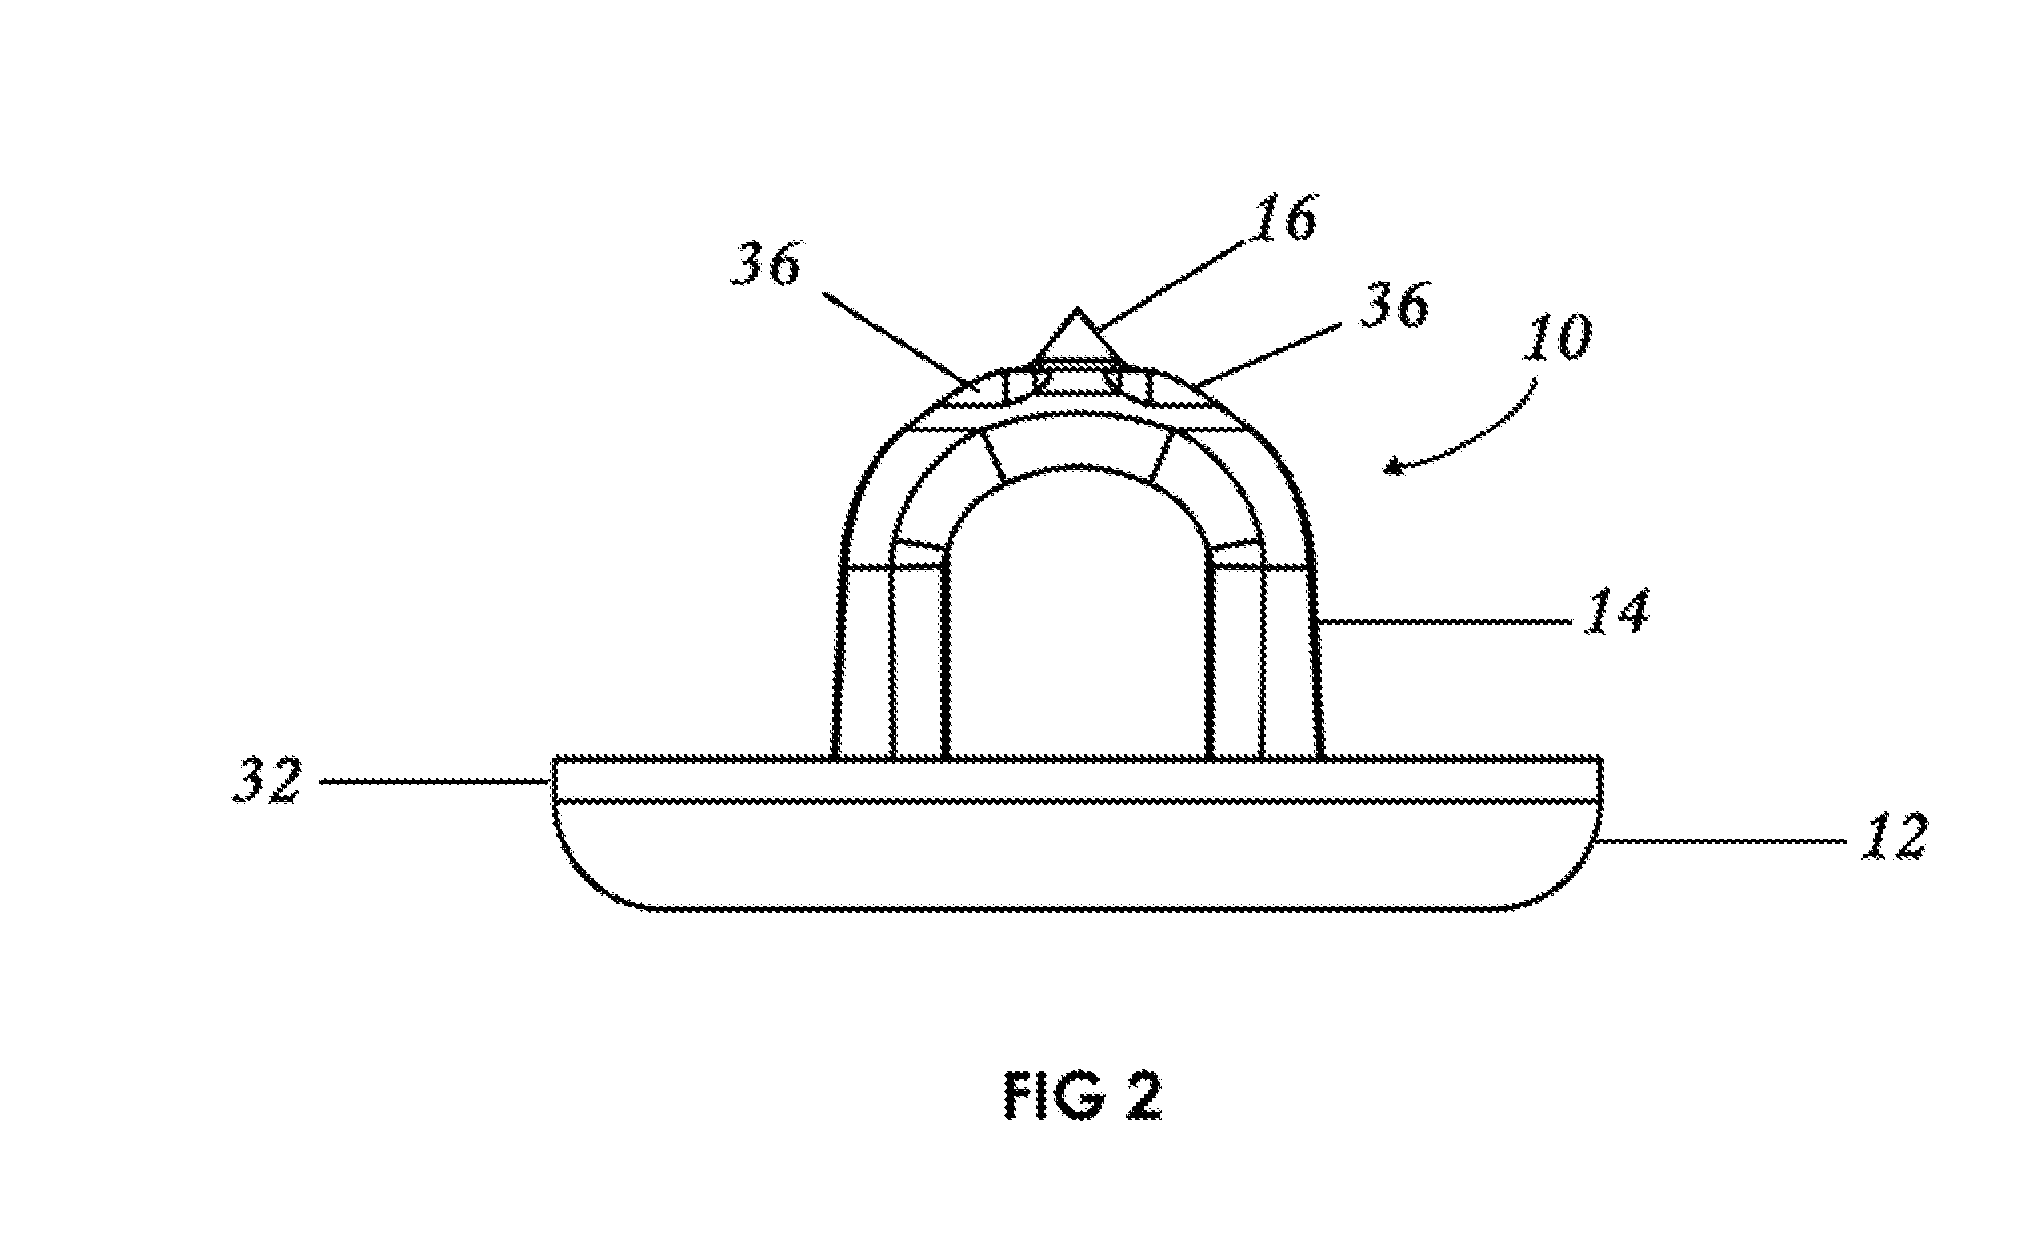 Controllable Rate Turbulating Nozzle